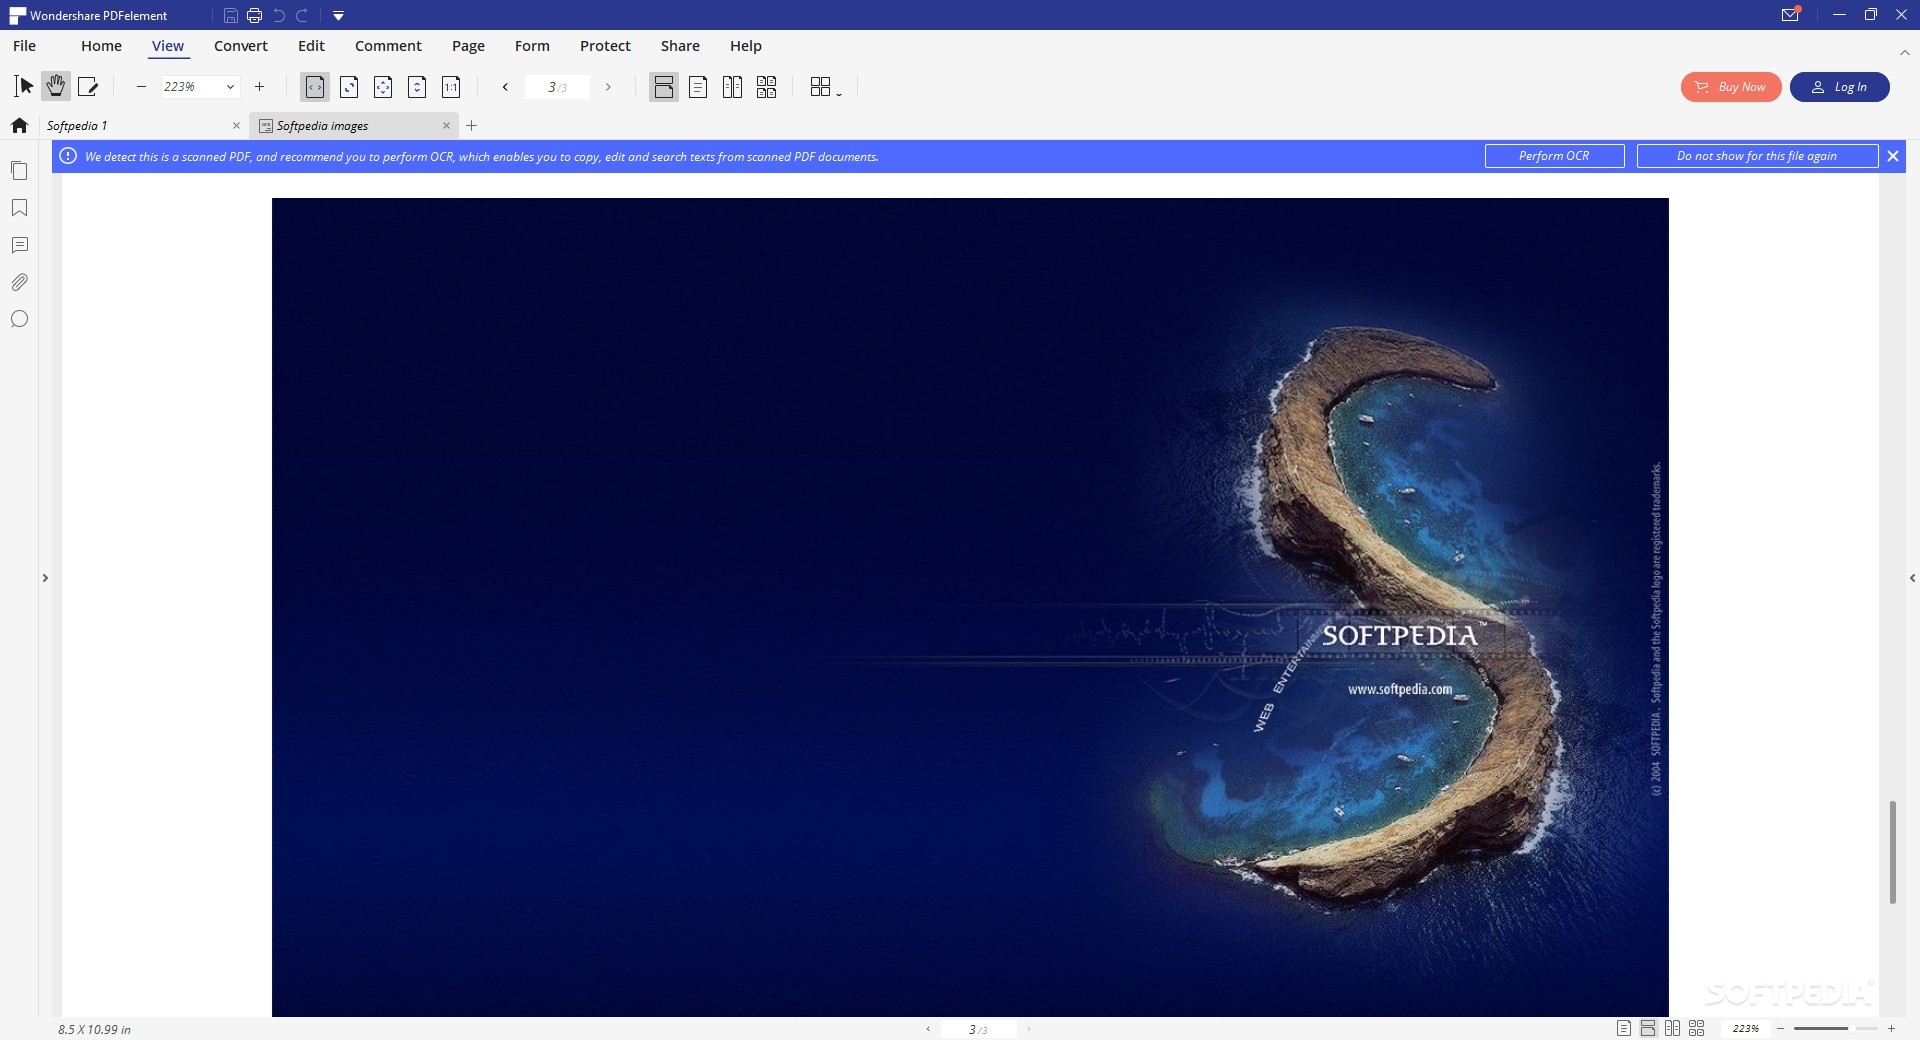 download the new for windows Wondershare PDFelement Pro 10.0.7.2464